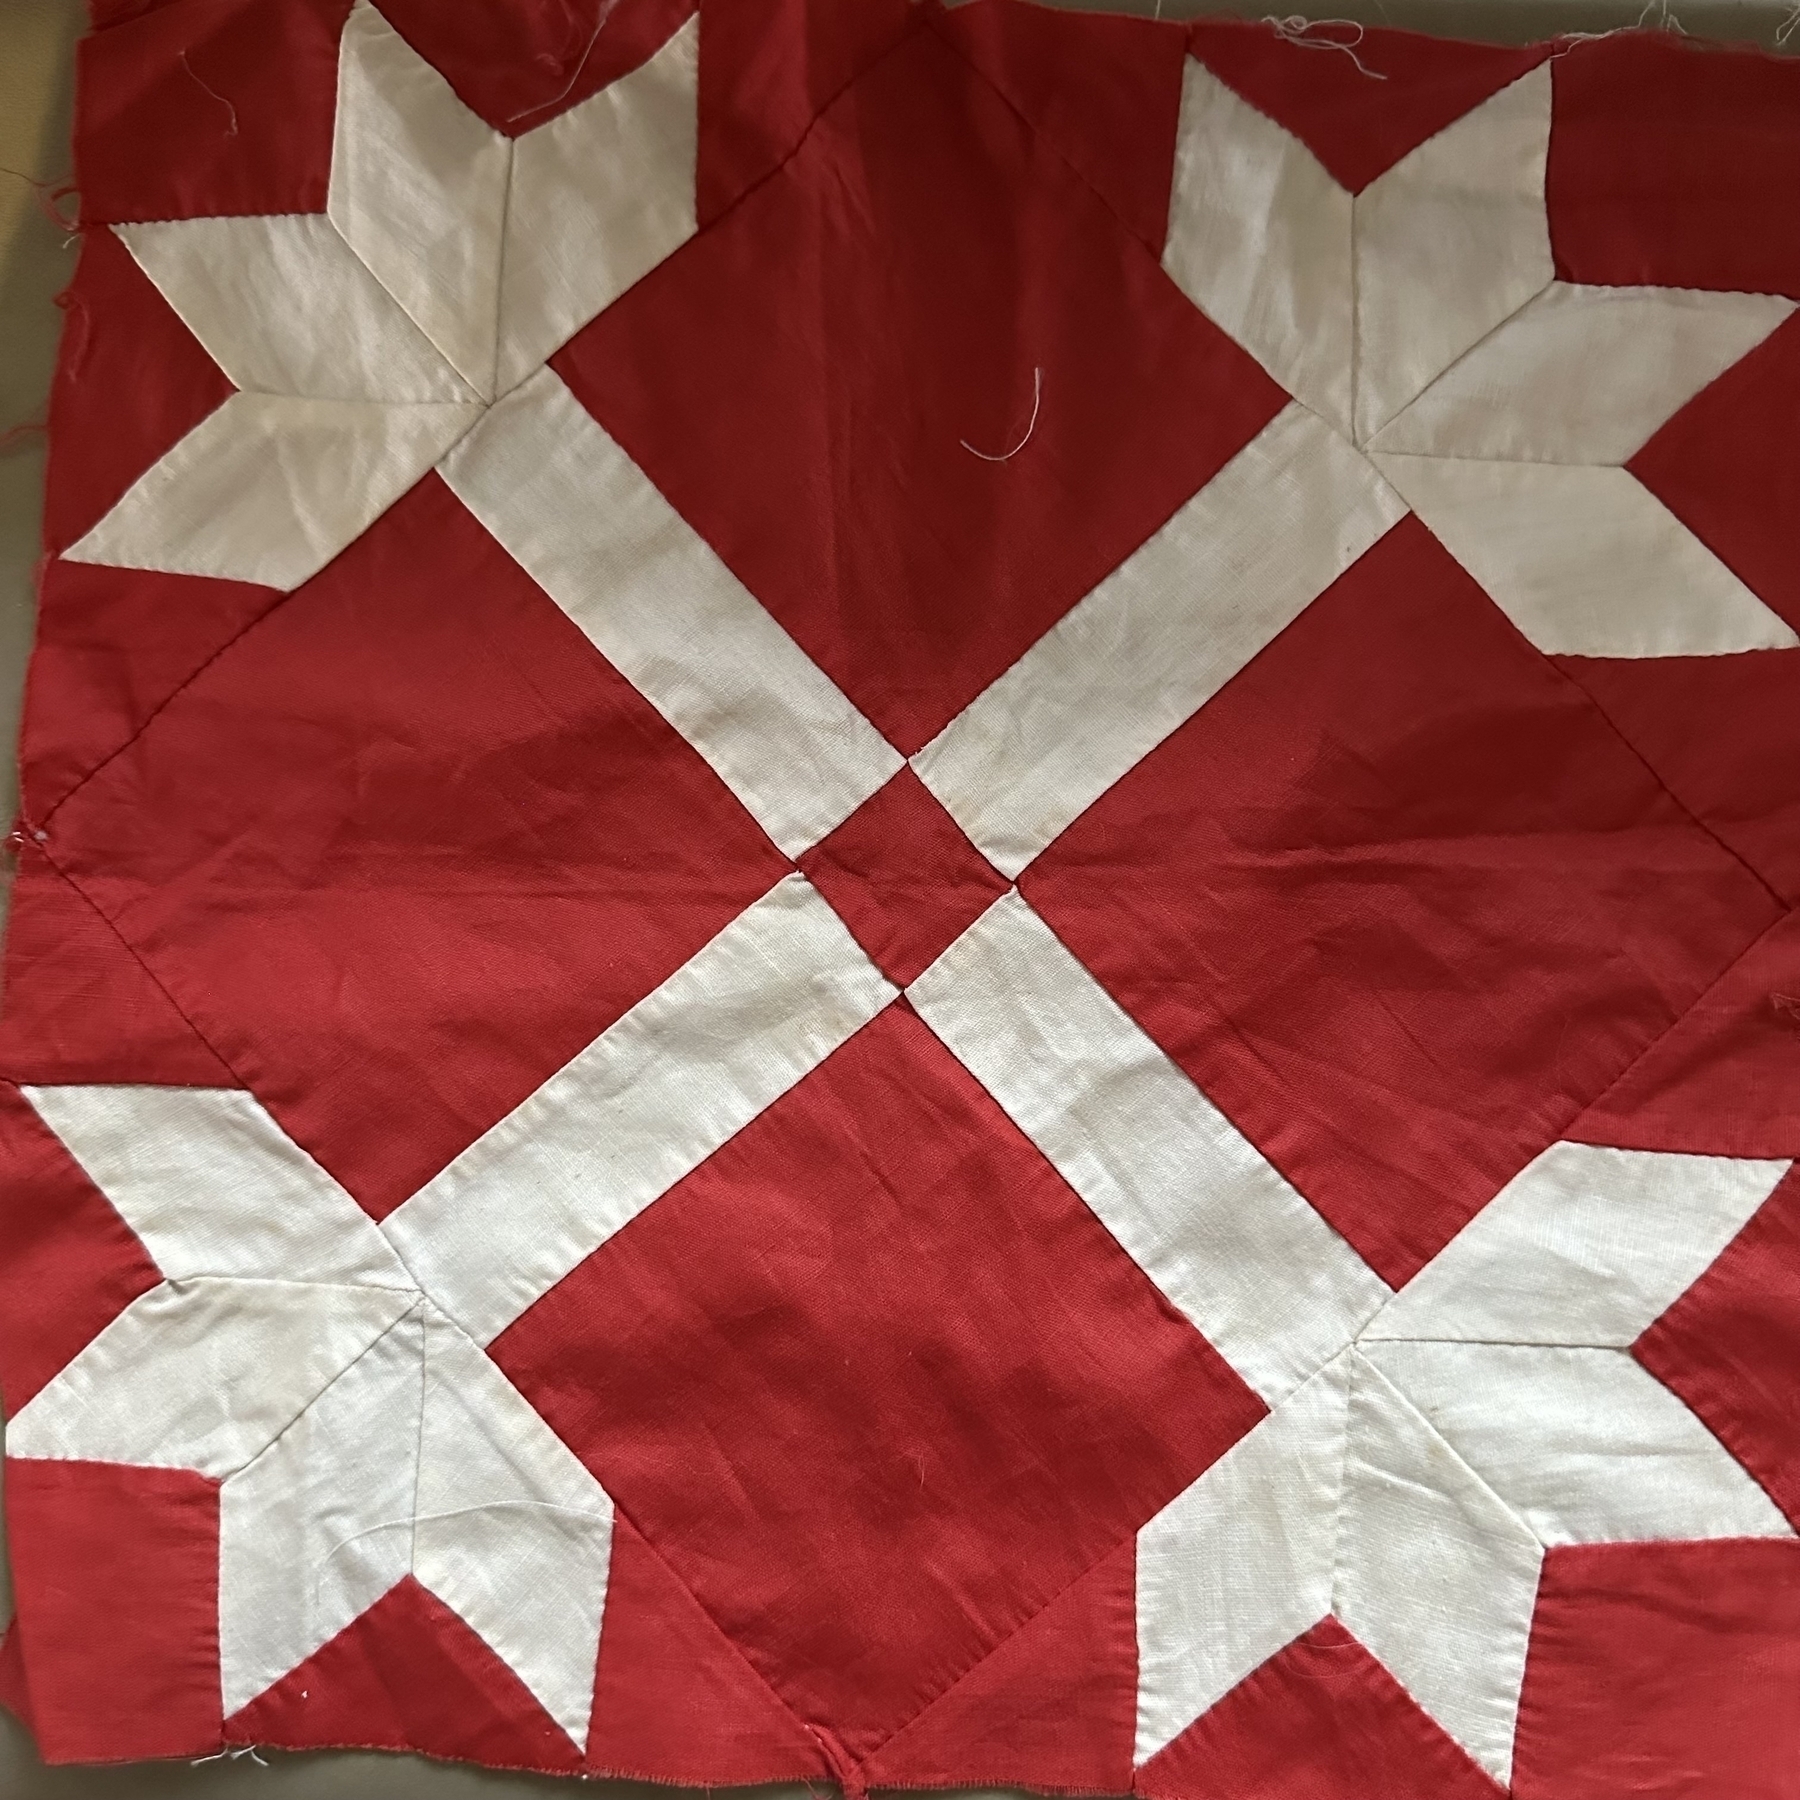 Mom’s hand sewn quilt piece in red.